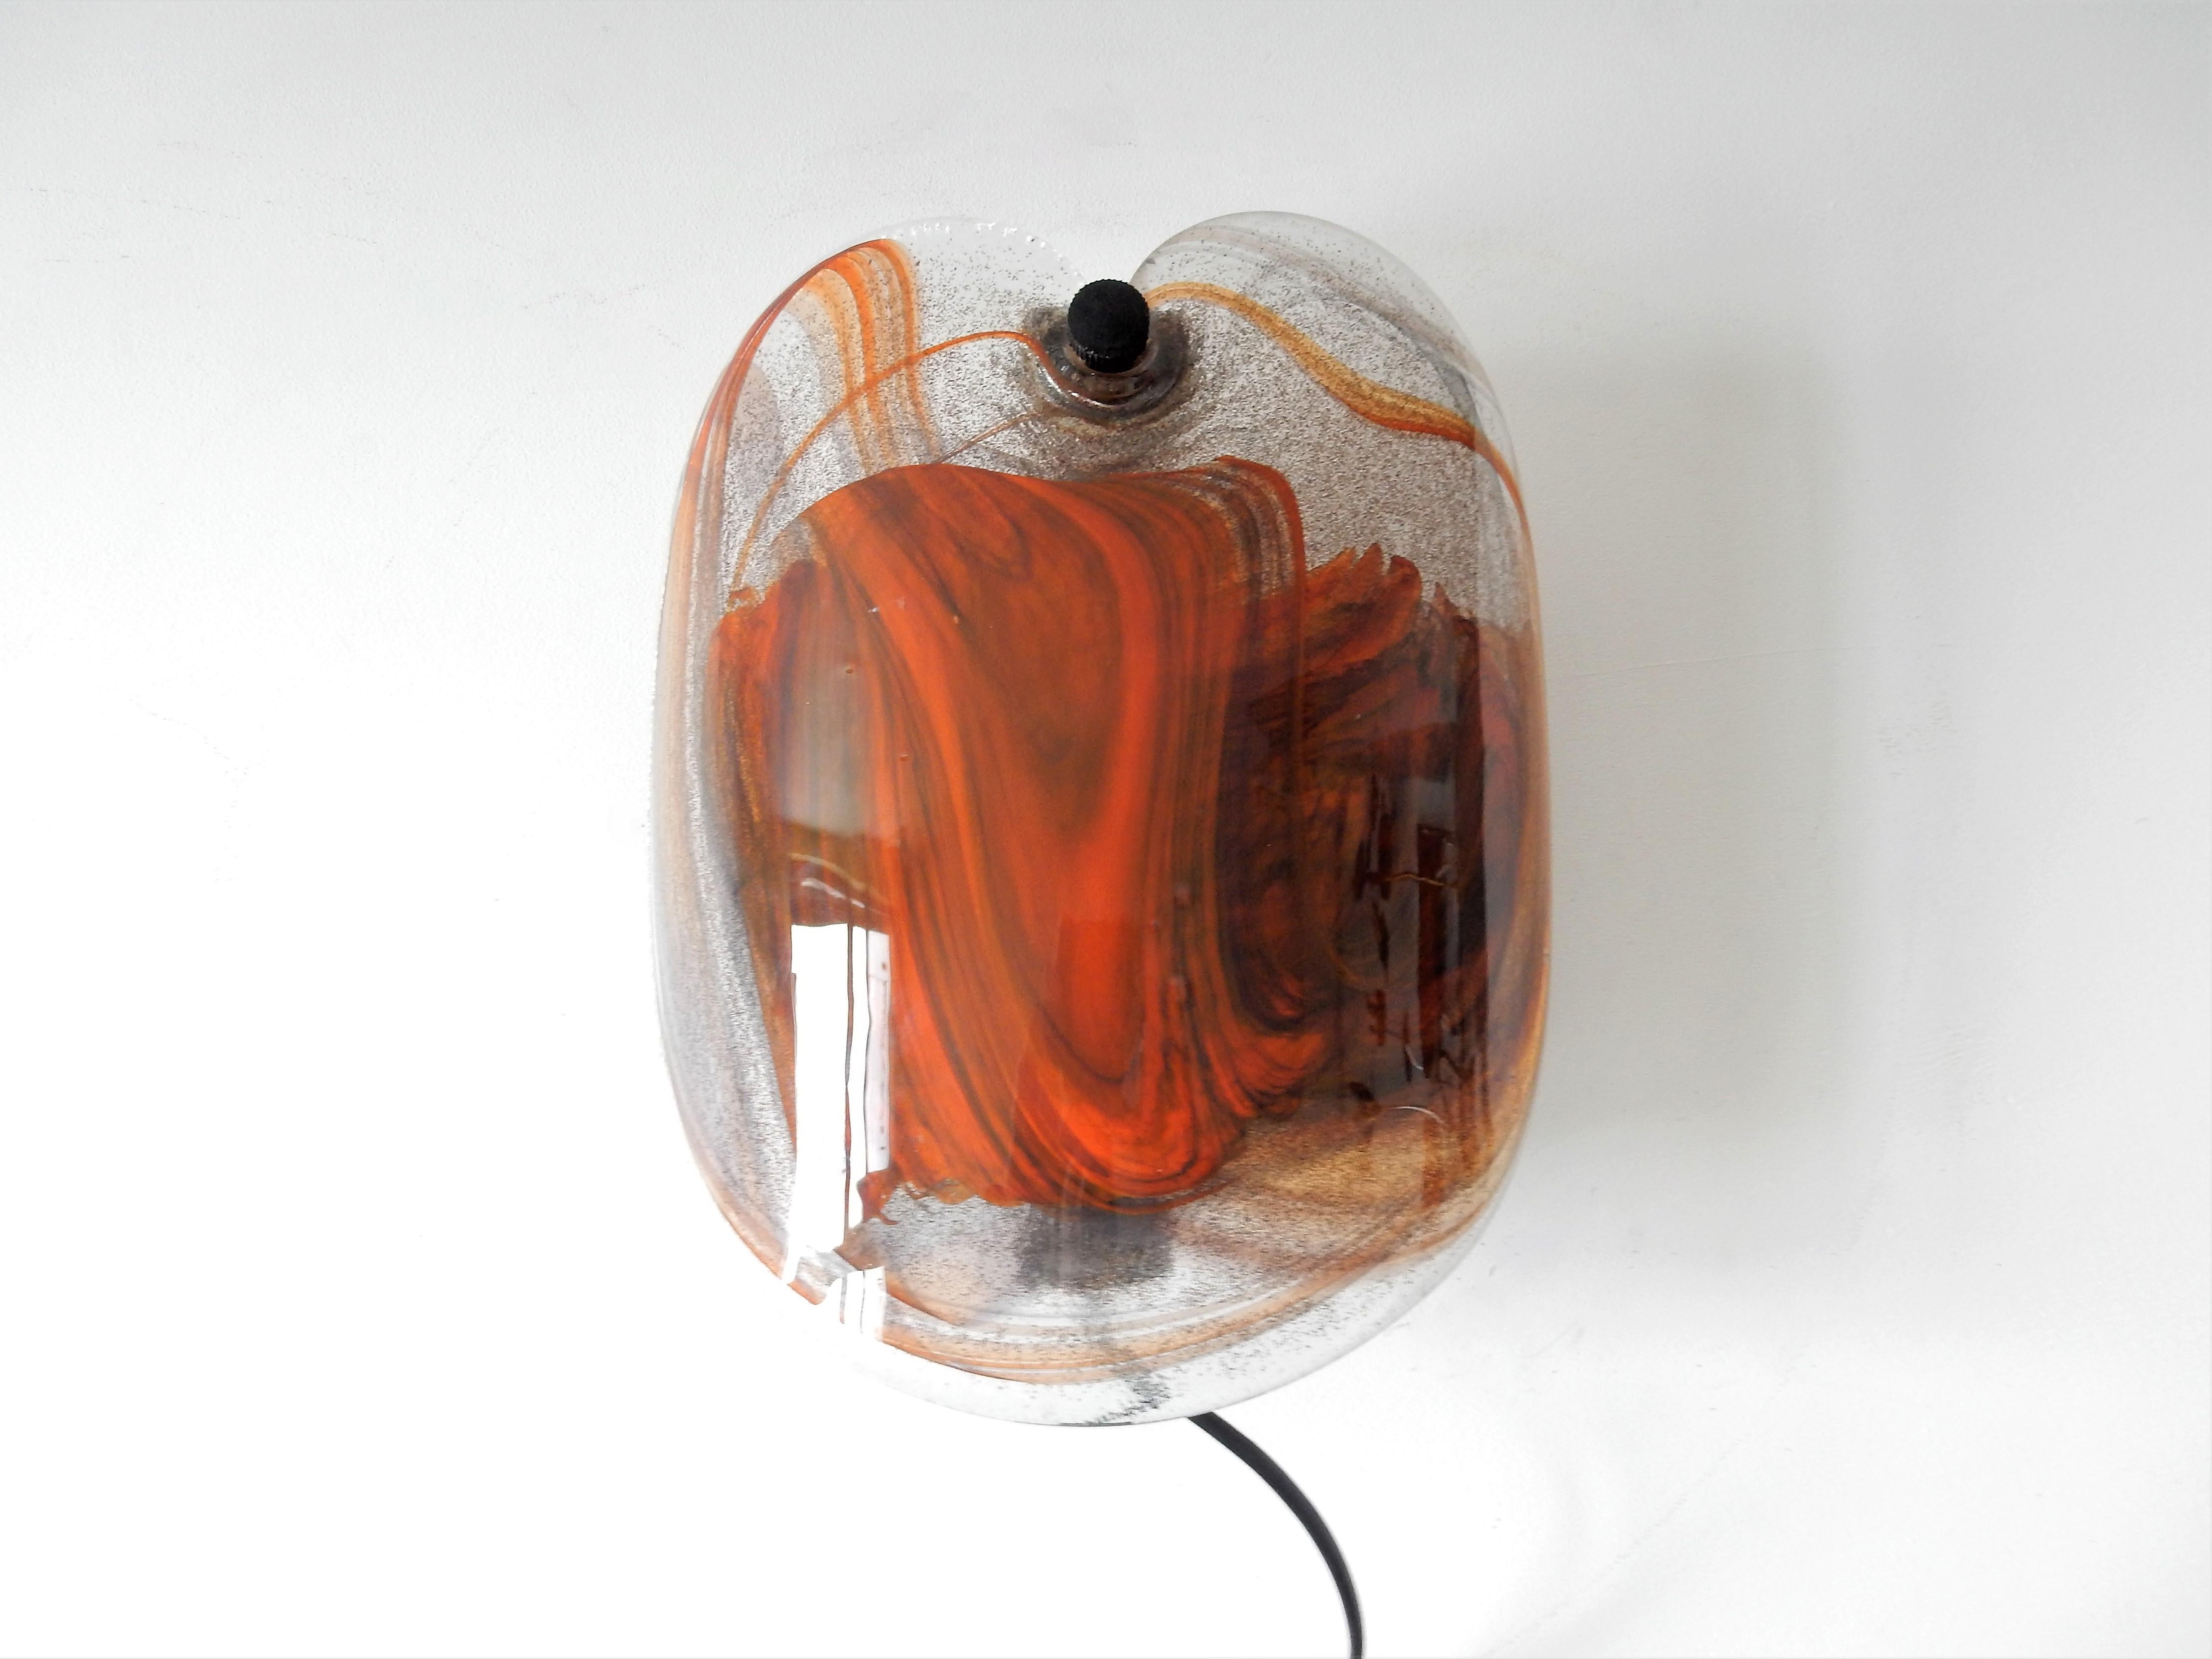 This very nice and decorative thick glass wall sconce, the 'Glasplattelampet', was designed by Per Lütken for Holmegaard in 1978. The bended glass plate is decorated with orange/brown colors inside the glass, that gives a very nice and warm glow